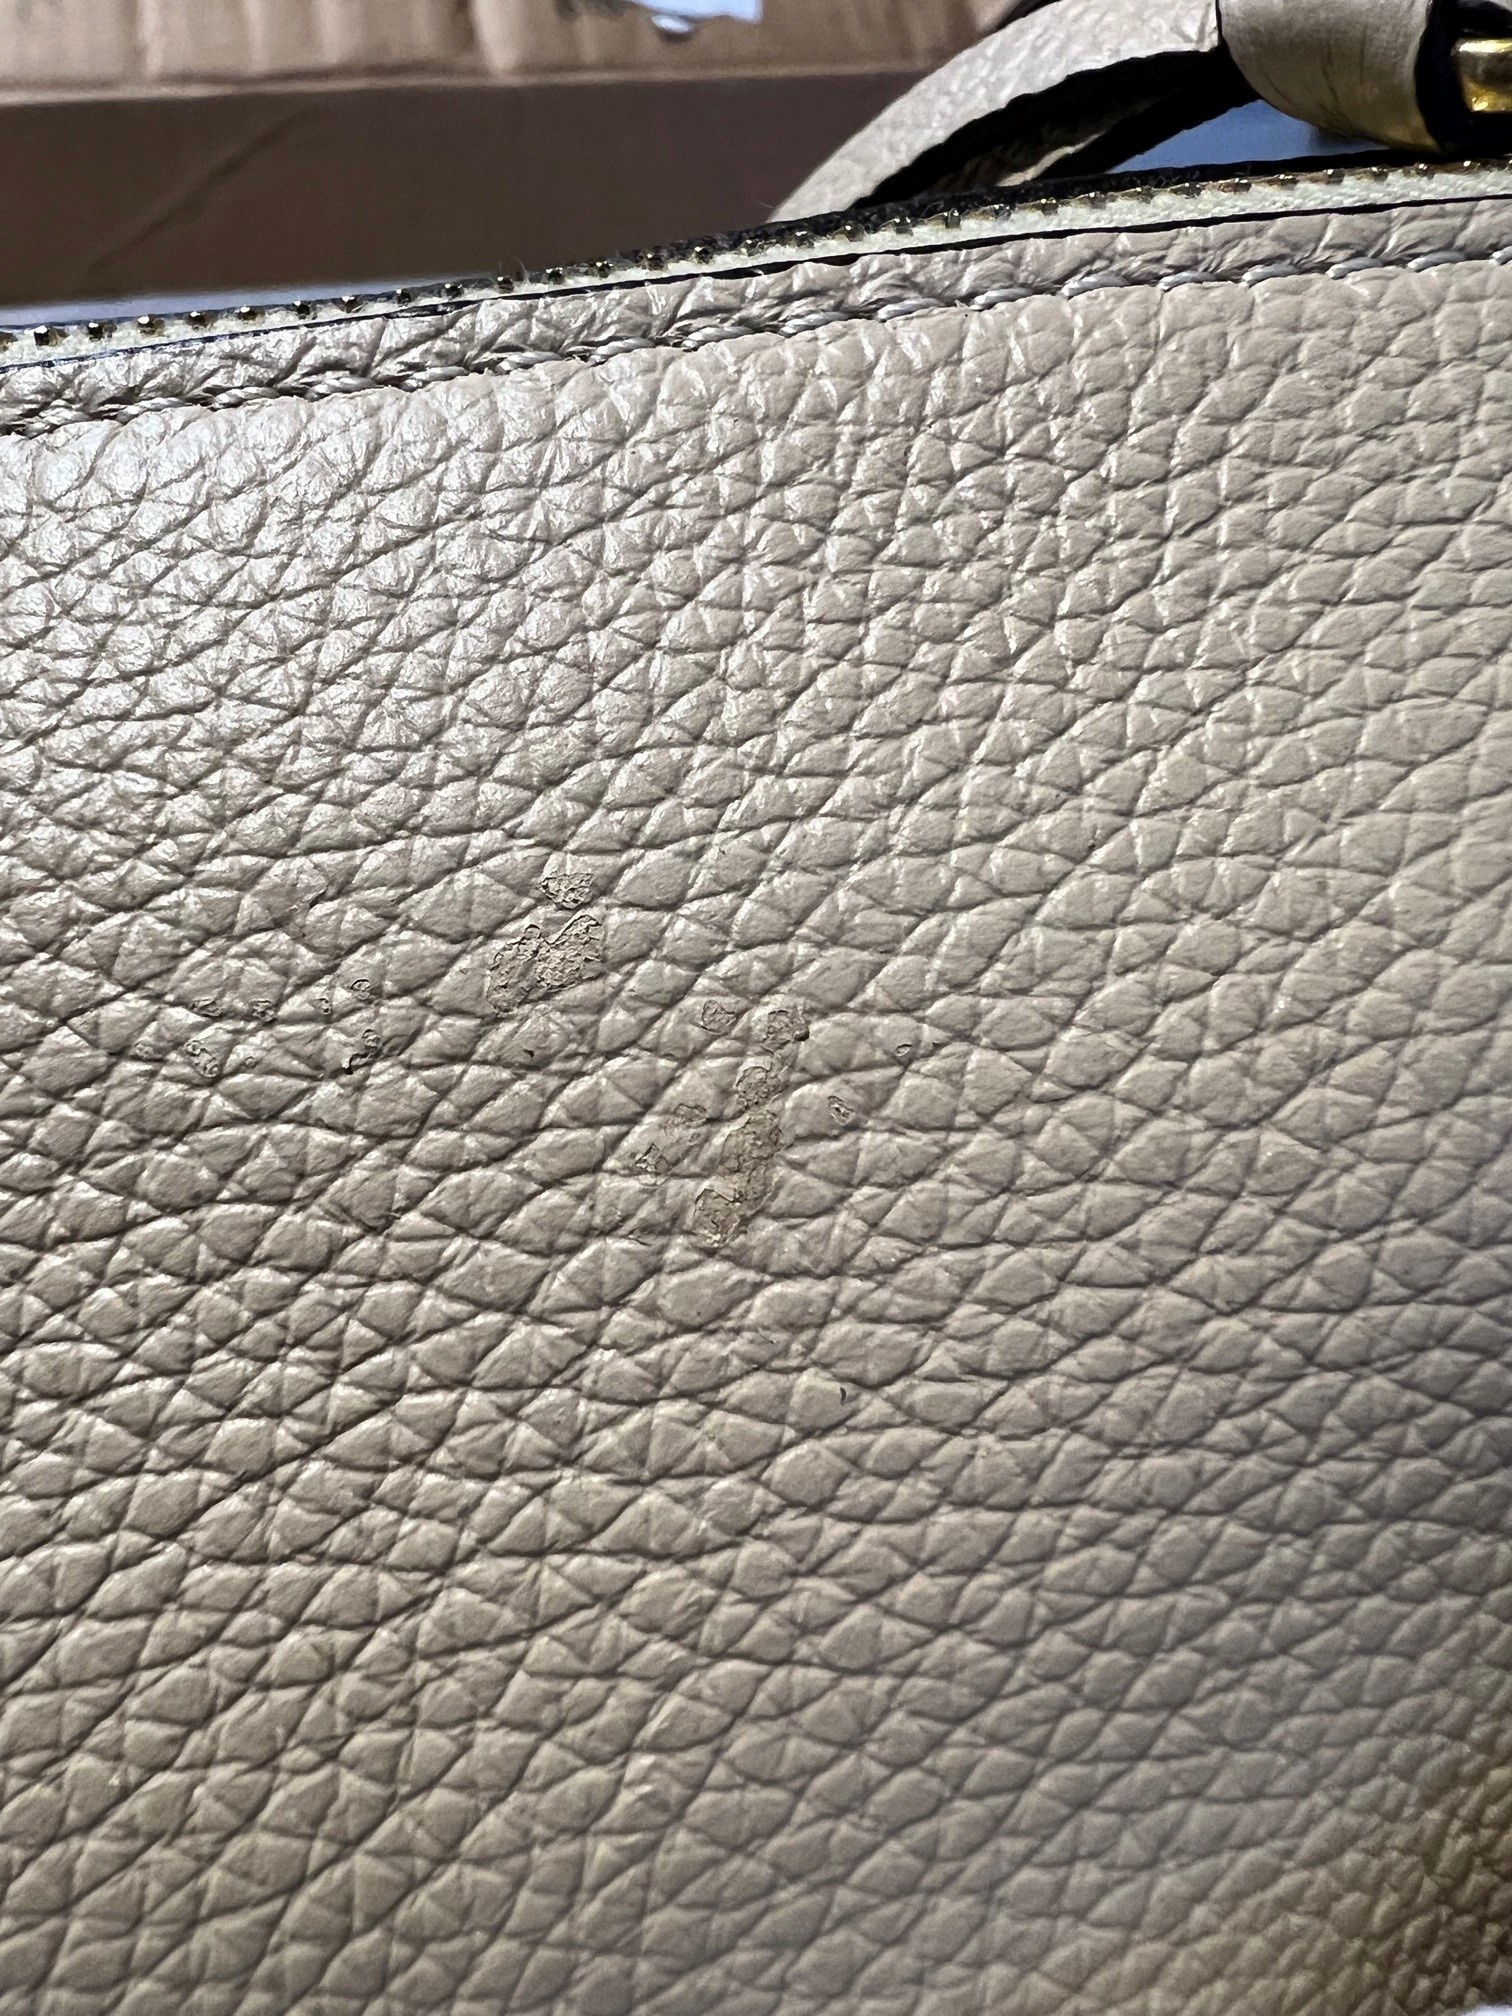 My Goyard 233 bag story from Bergdorf Goodman, and its review